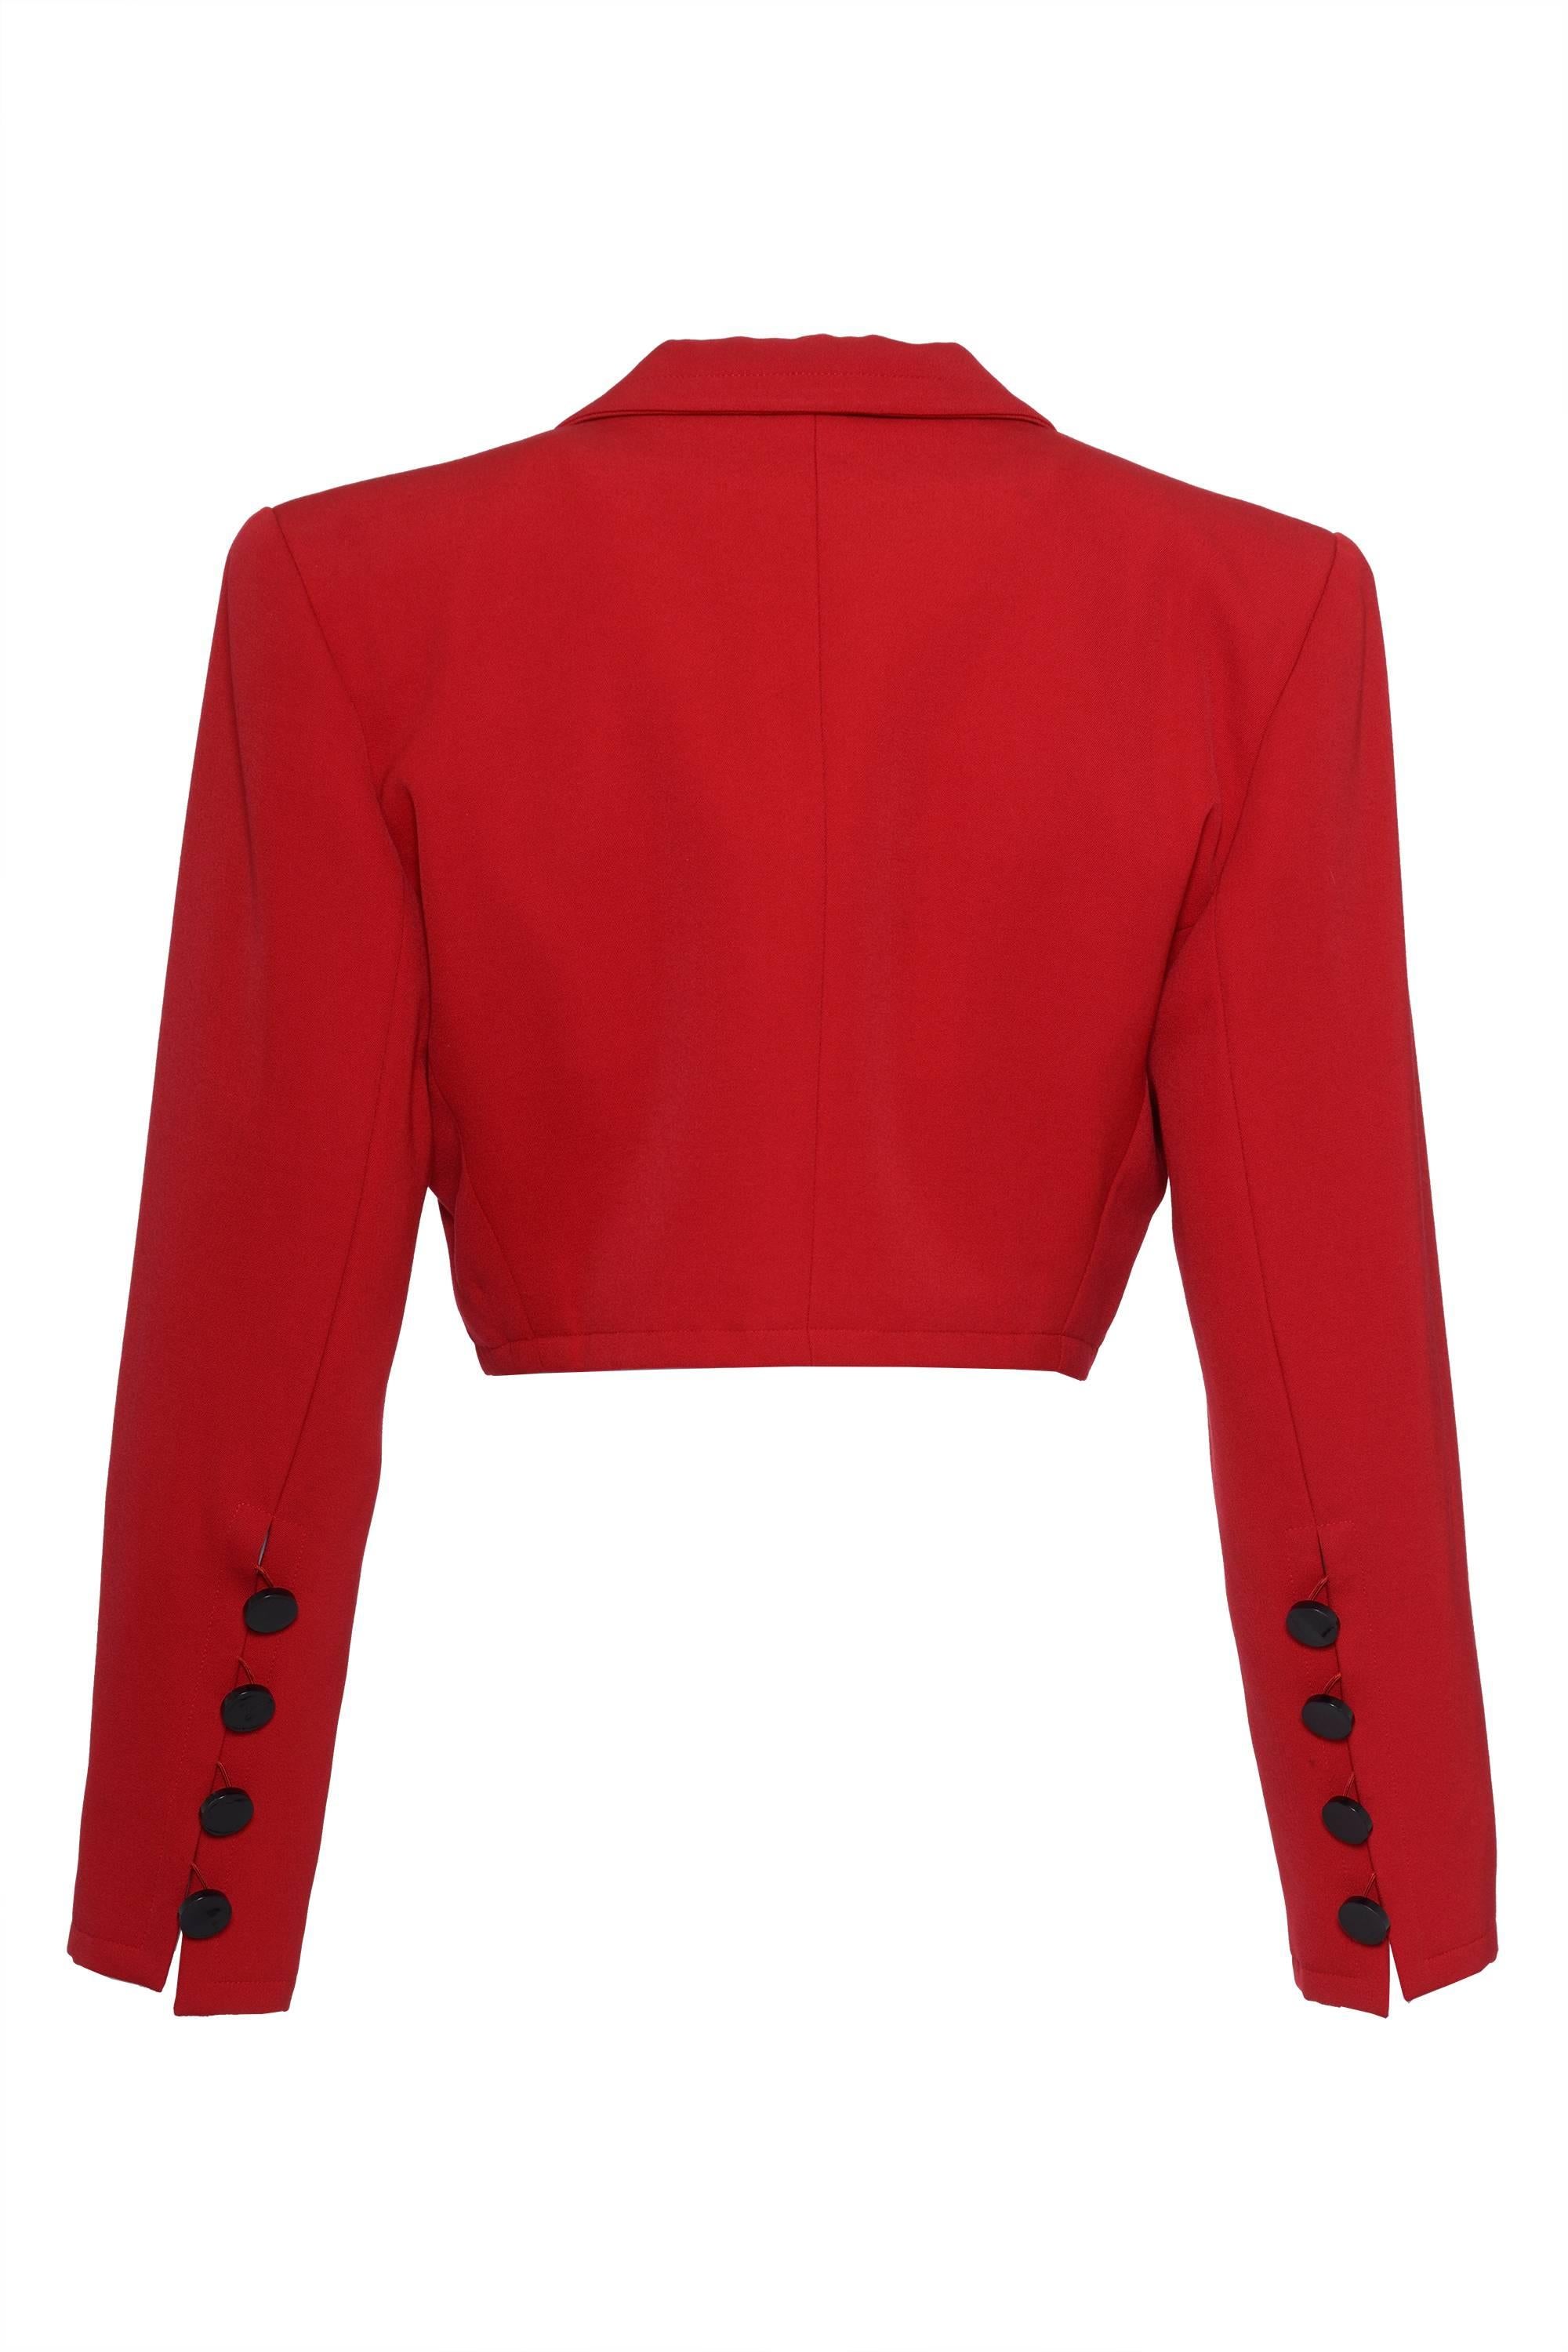 1990s YVES SAINT LAURENT 
This red bolero jacket by Yves Saint Laurent has two frontal welt pockets, tailoring seam, round collar peak lapel, two-piece sleeves and has long buttoned cuff.

Excellent vintage condition

Label: YVES SAINT LAURENT Rive